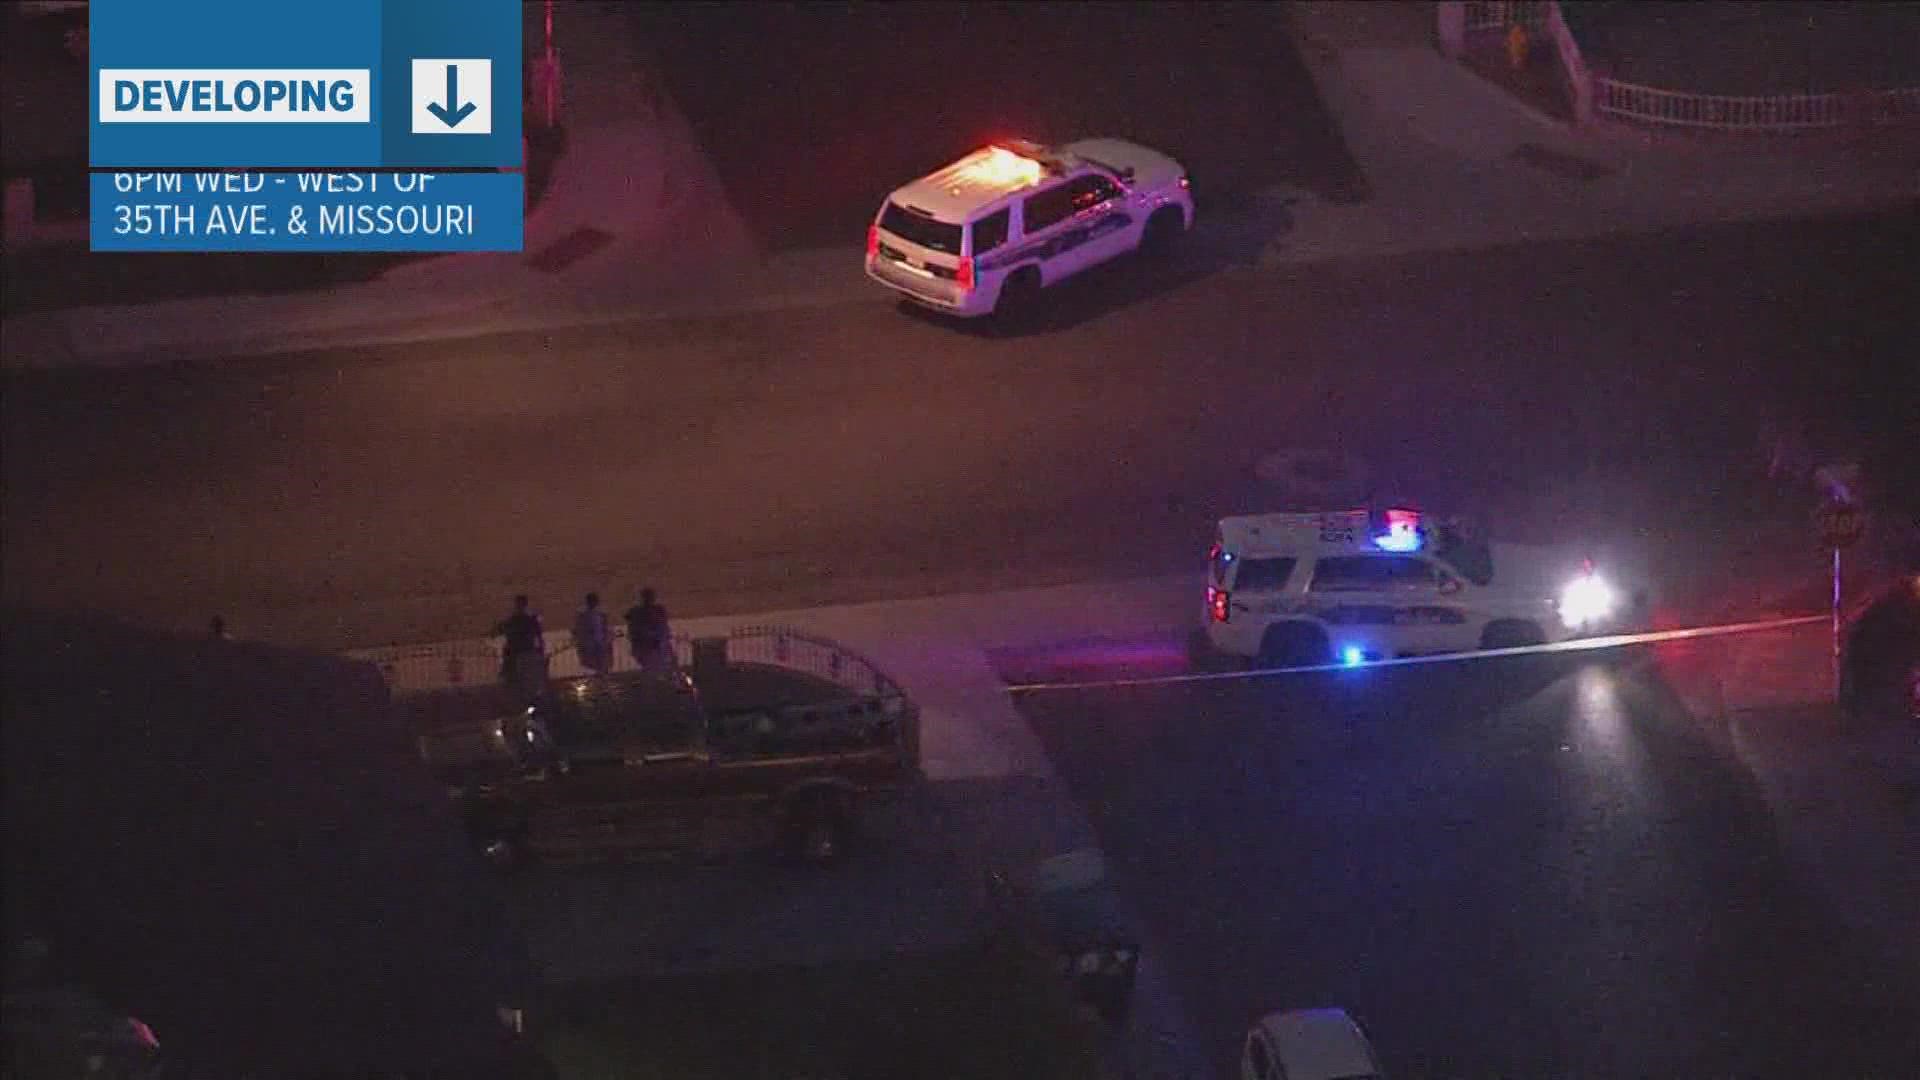 A Grand Canyon University student has been hospitalized after they were struck by a stray bullet Wednesday night.